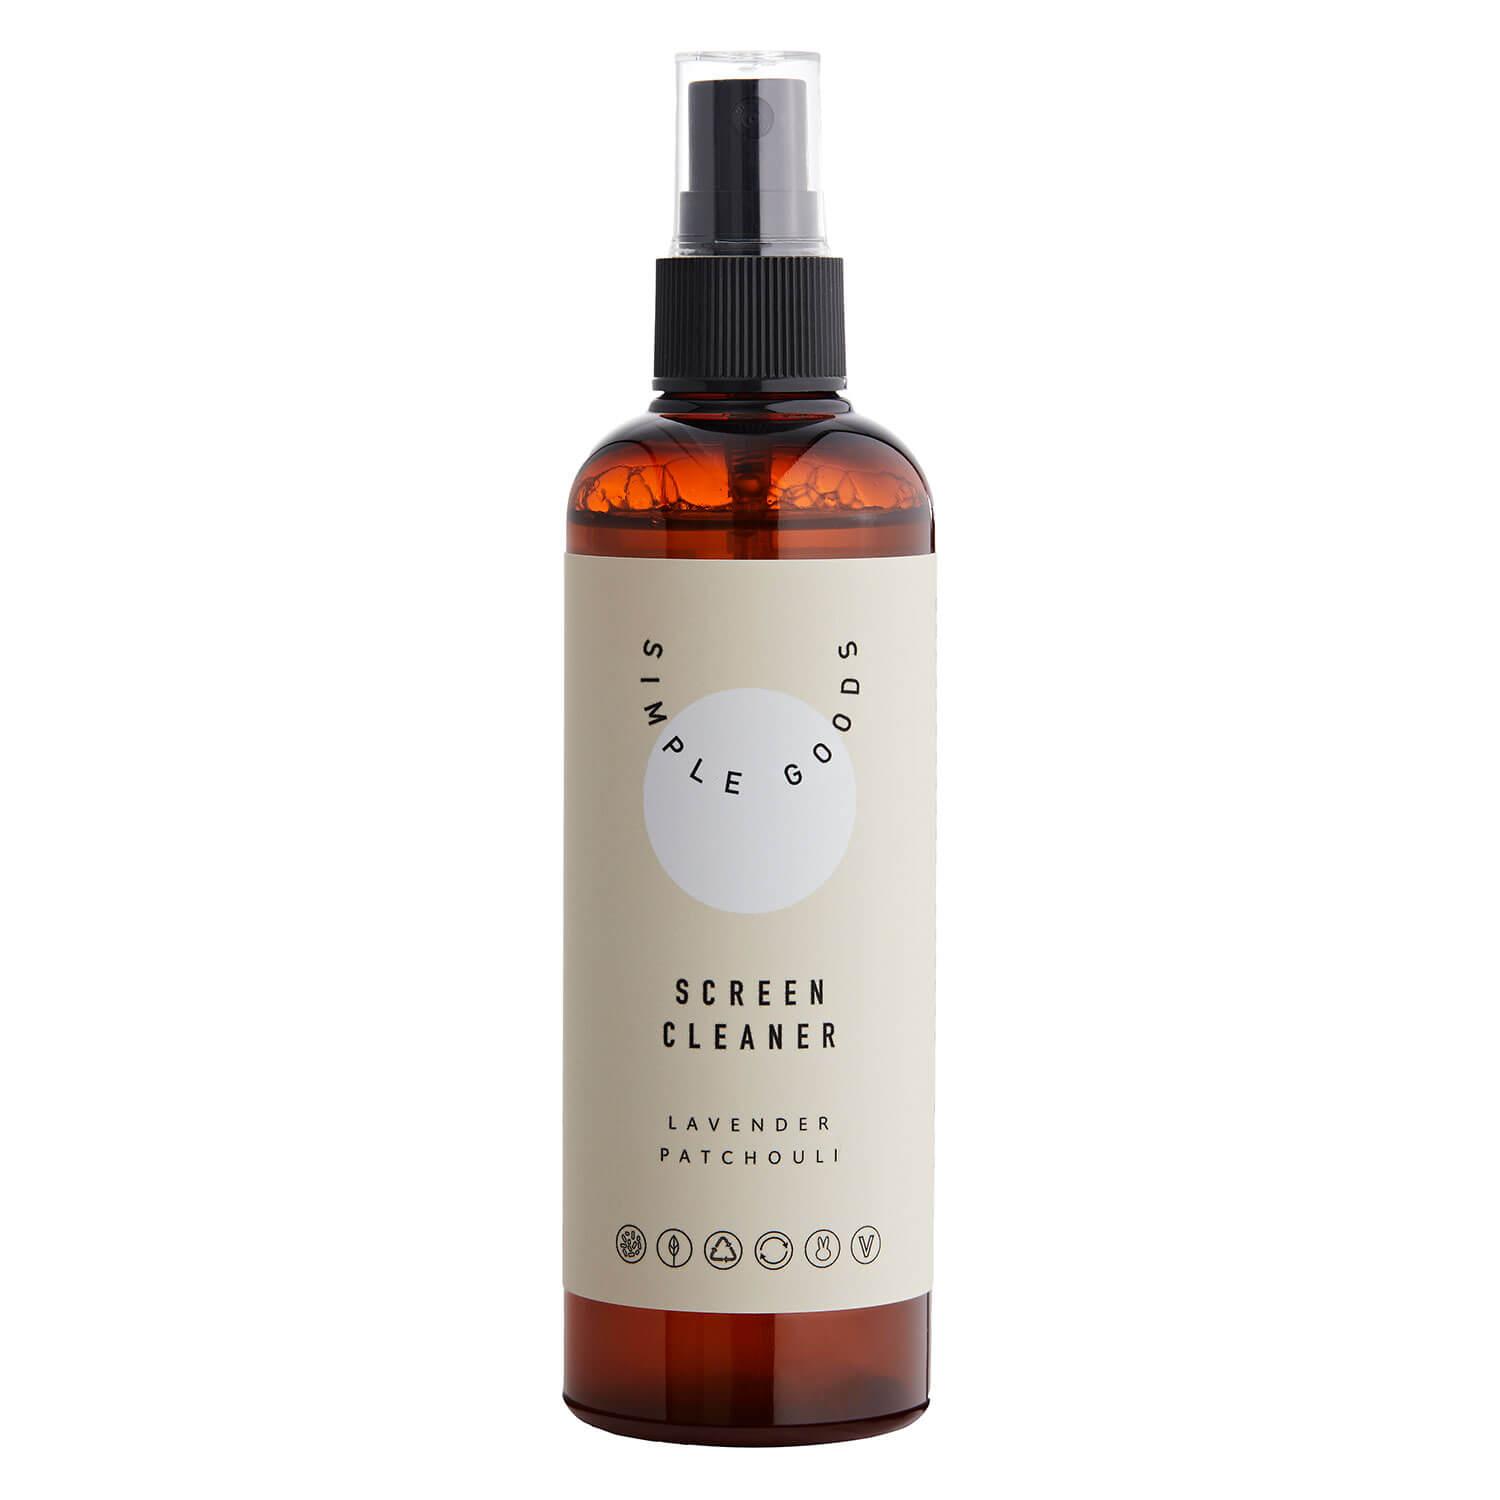 SIMPLE GOODS - Screen Cleaner Lavender, Patchouli 